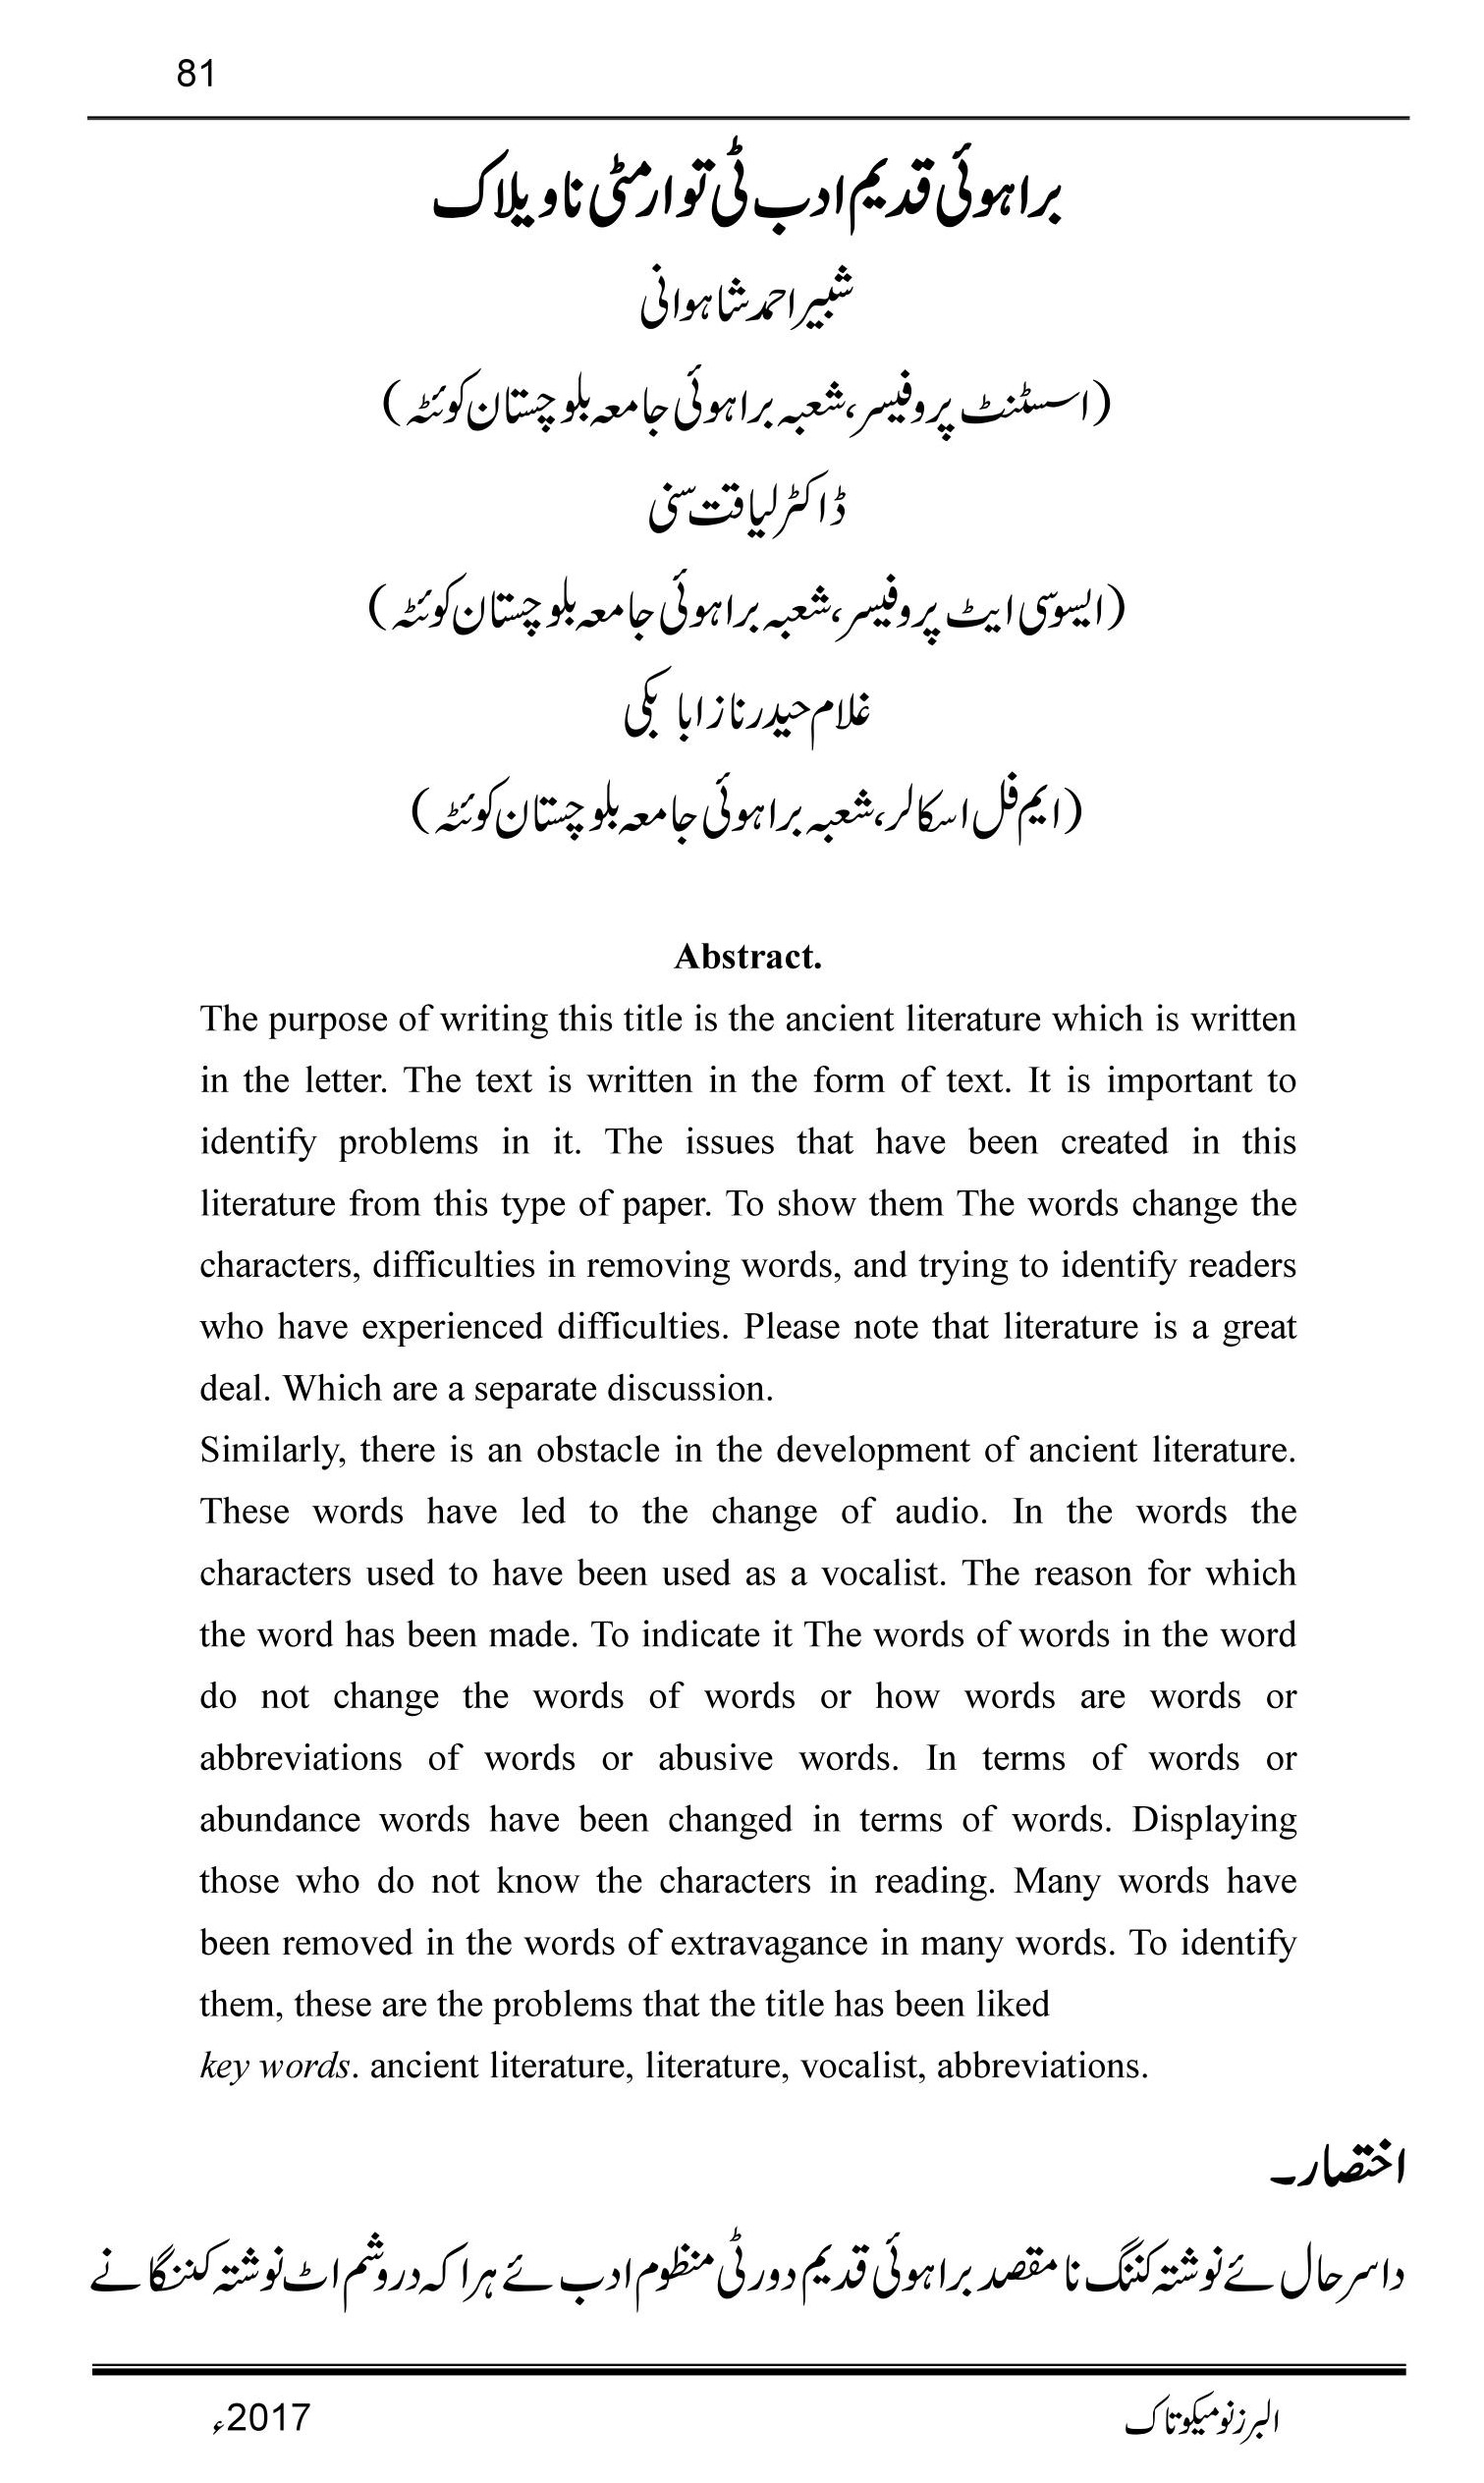 Complications of Code switching in Brahui old literature